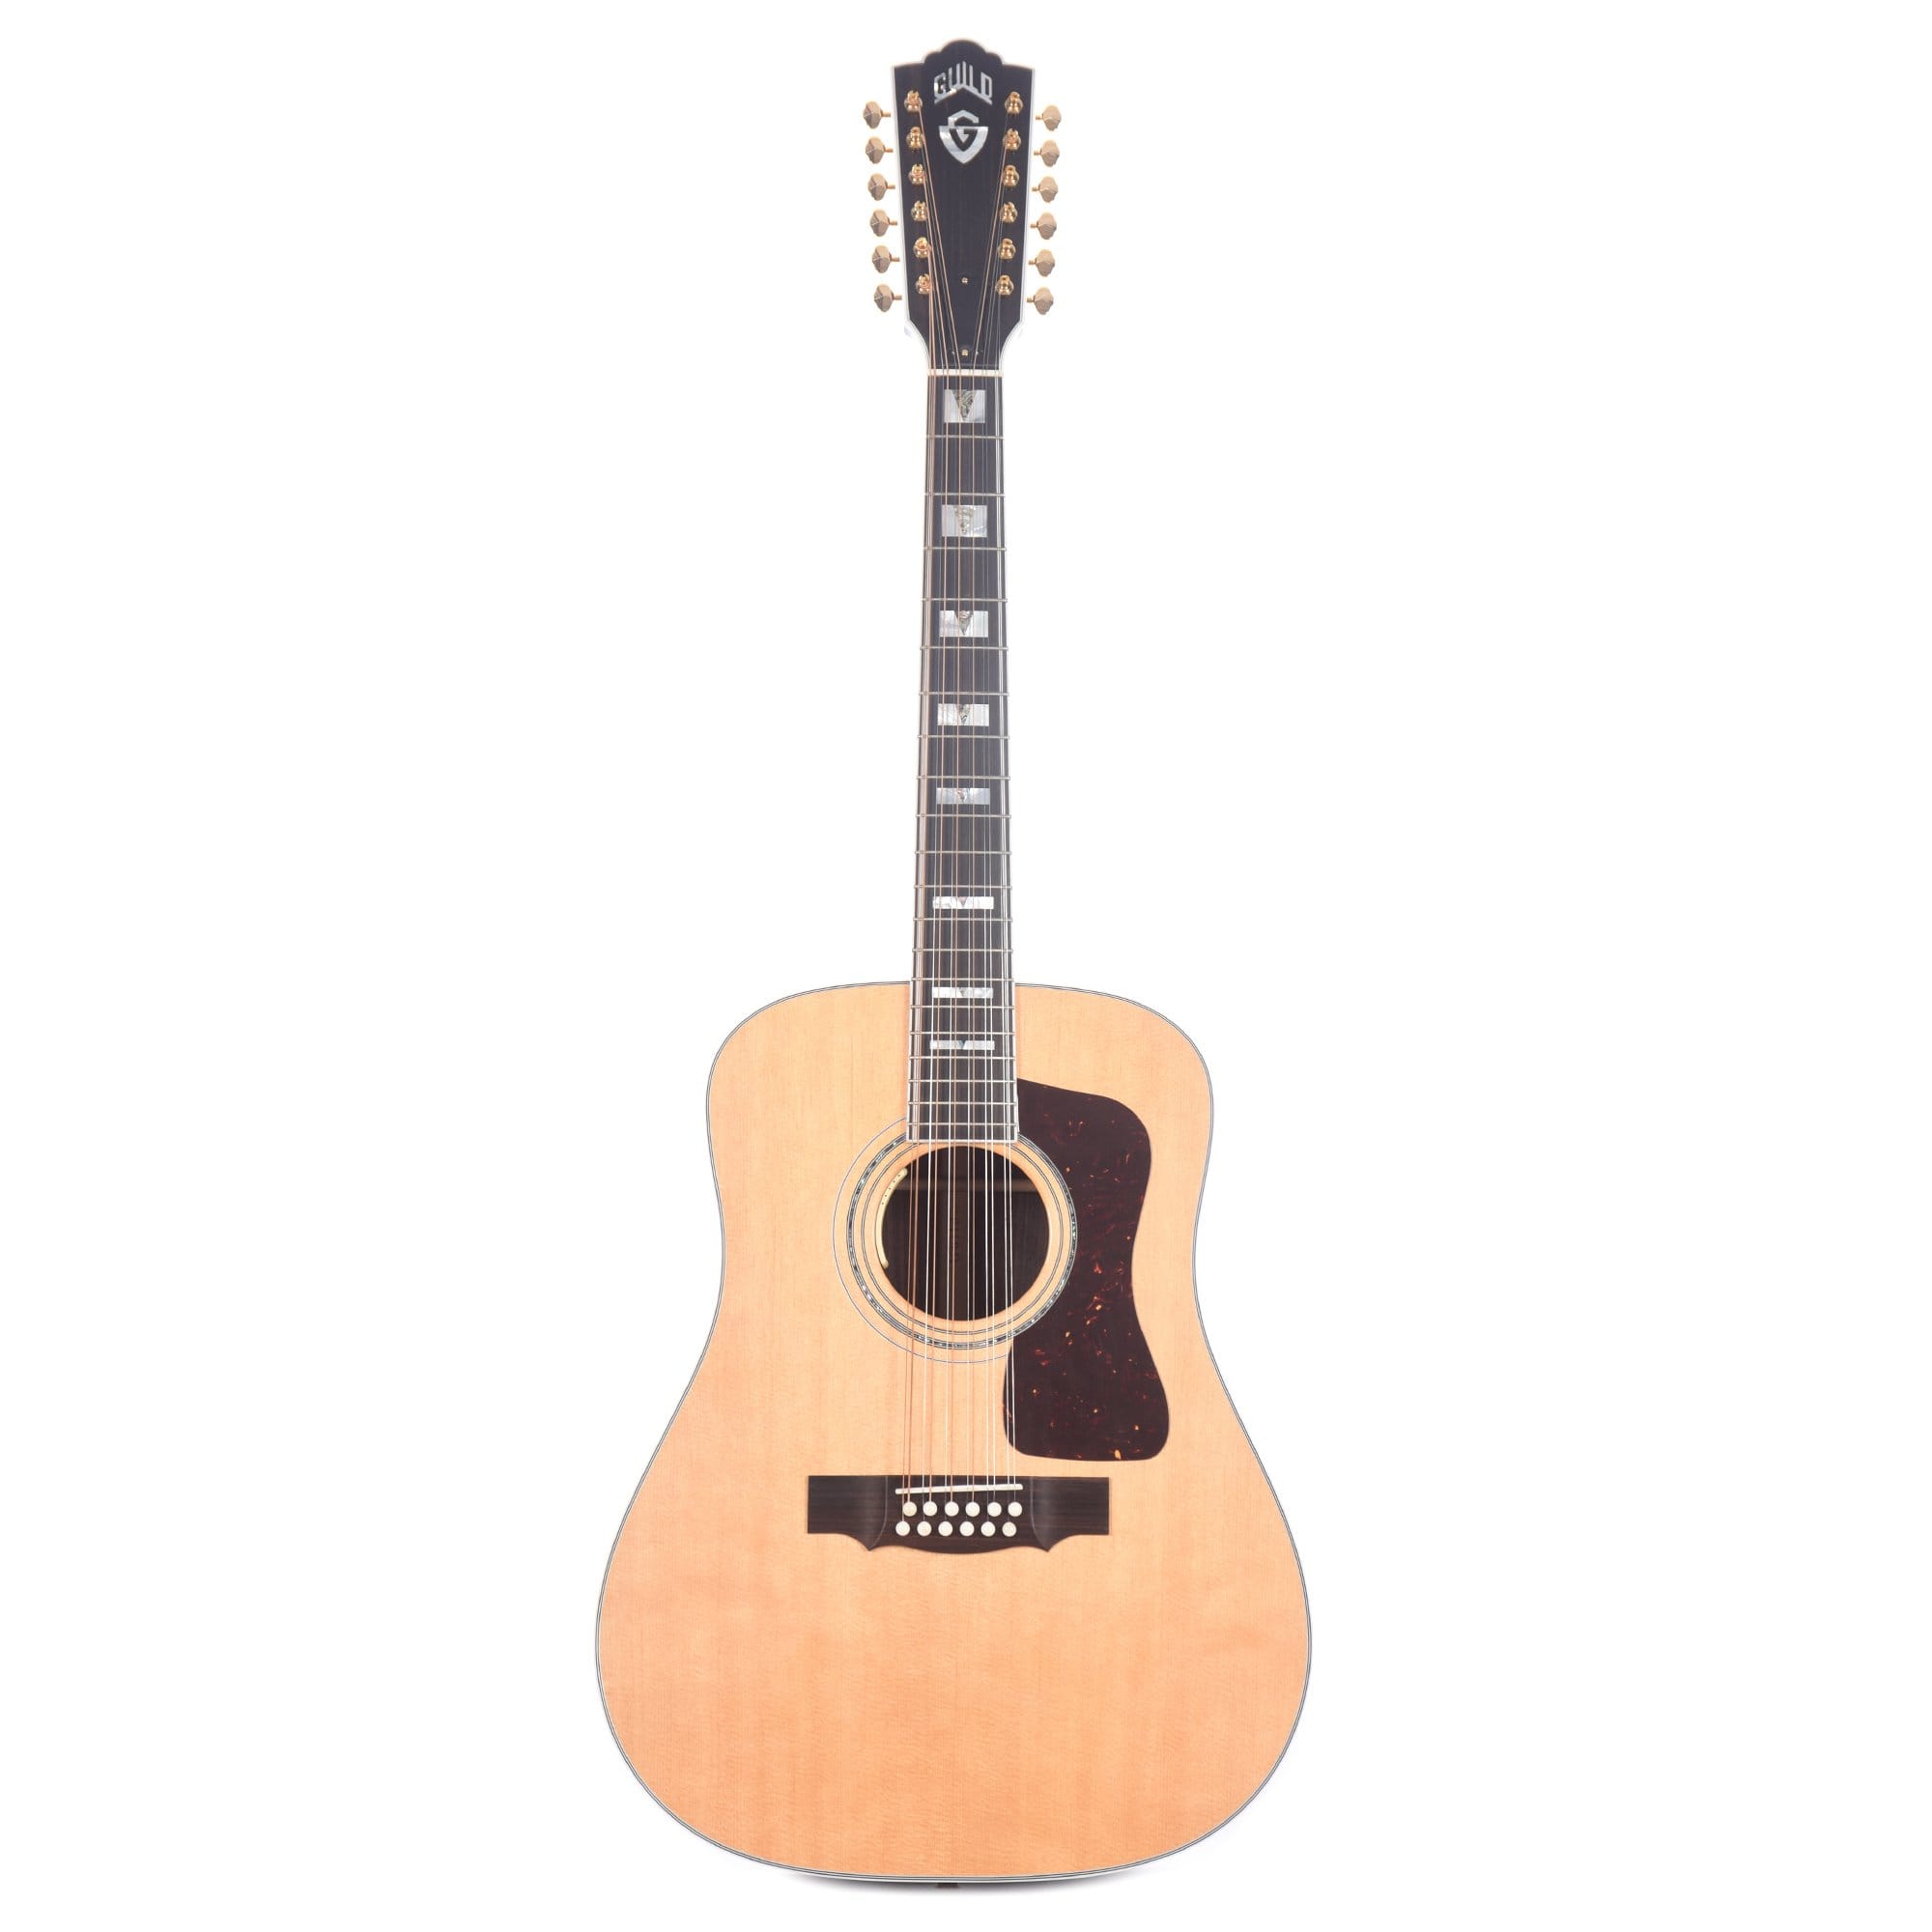 Guild Special Run USA D-512E Spruce/Rosewood 12-String Acoustic Guitars / Dreadnought